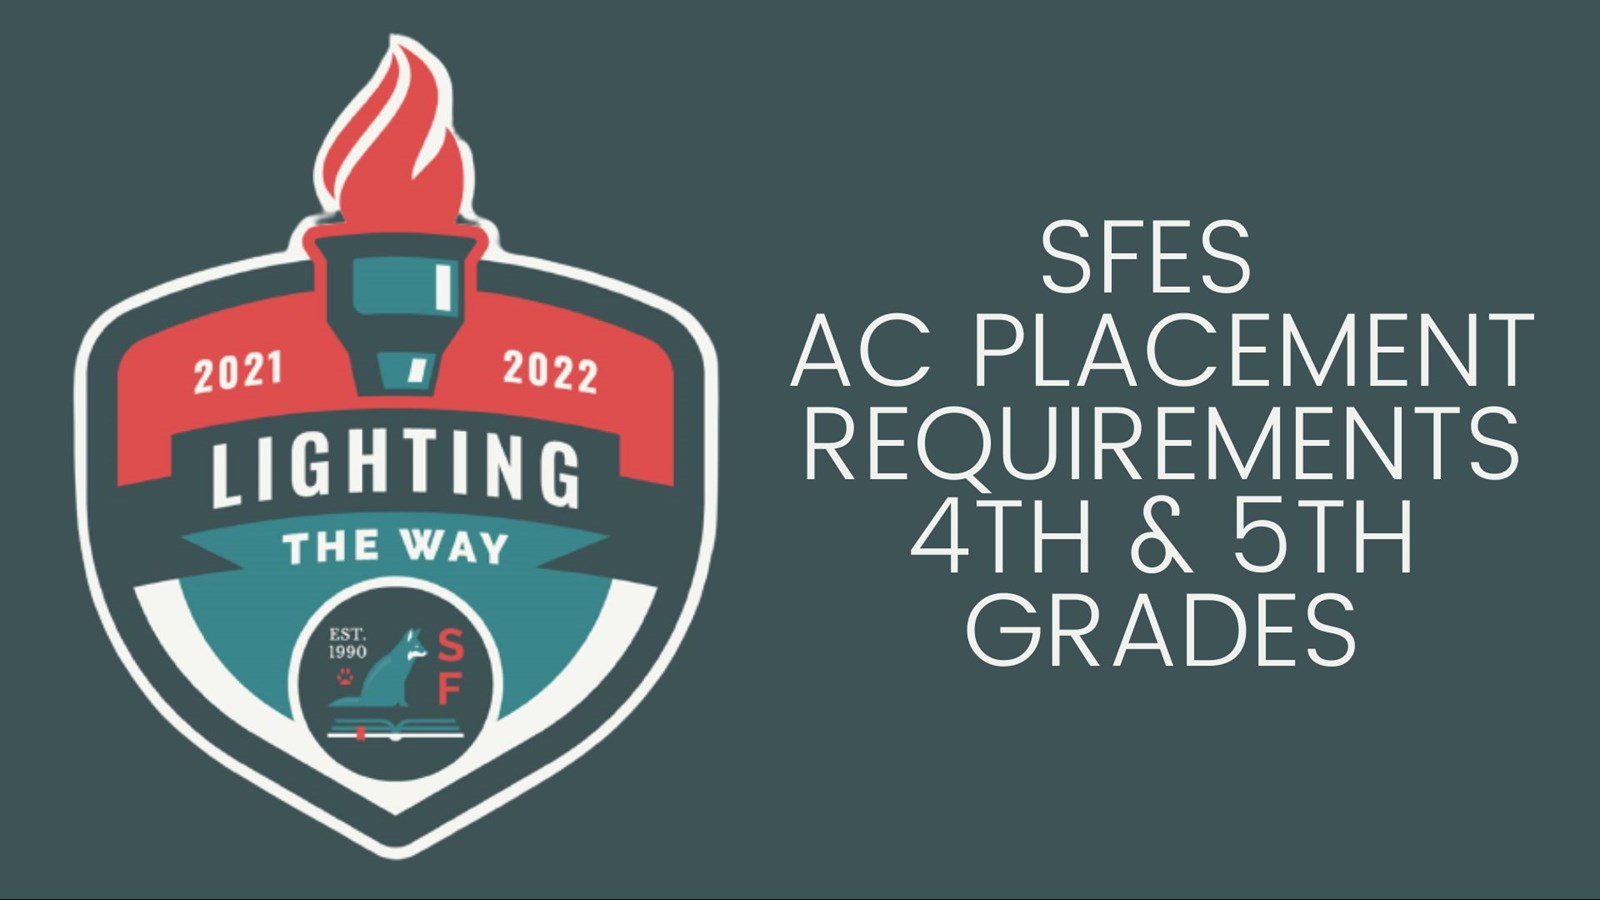 AC Placement Requirements